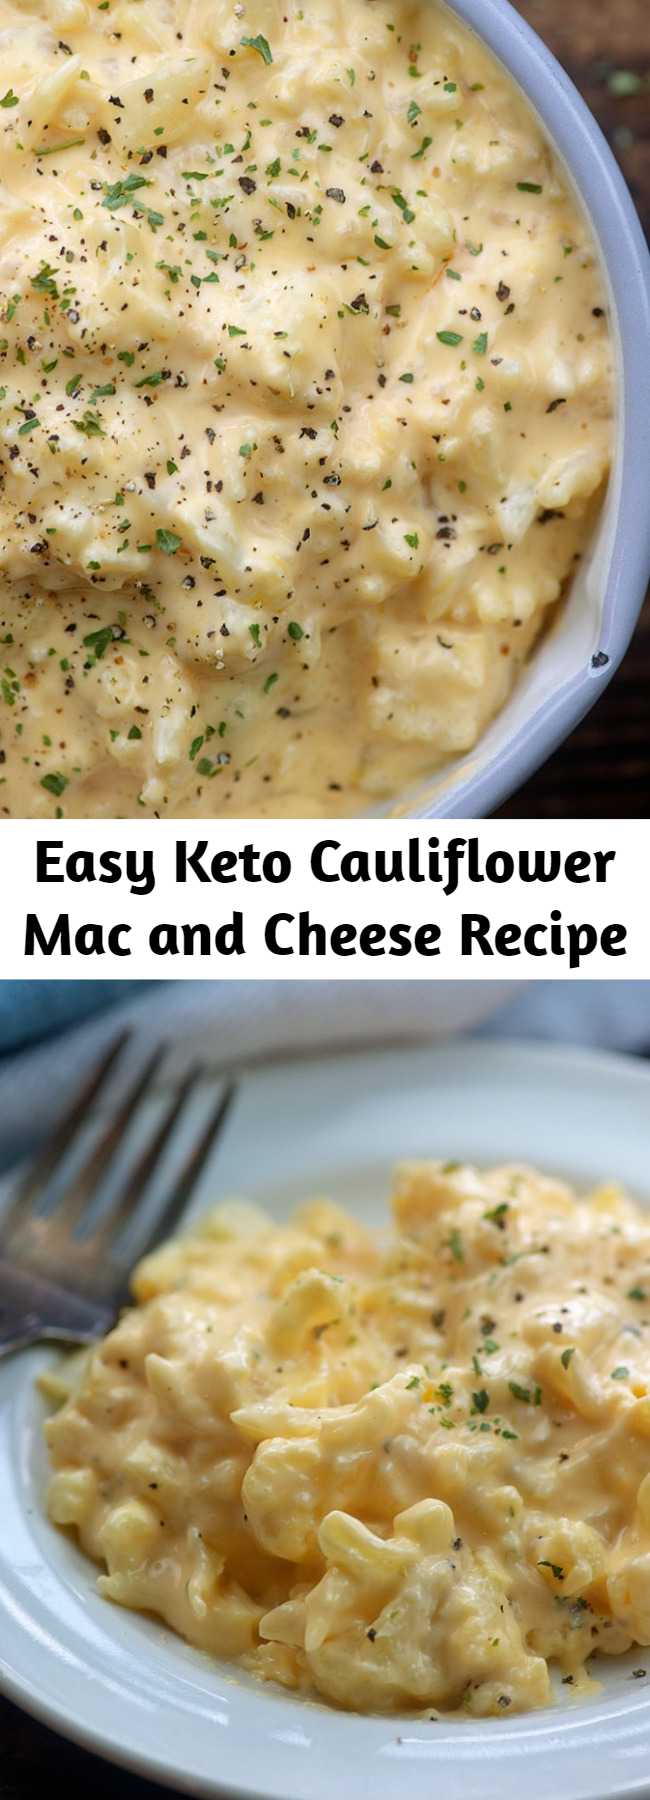 Easy Keto Cauliflower Mac and Cheese Recipe - Cauliflower mac and cheese is extra cheesy and melty! This tastes so much like the real deal that I bet you won’t even miss the carbs. This one is both kid friendly and keto friendly! #keto #lowcarb #cauliflower #recipe